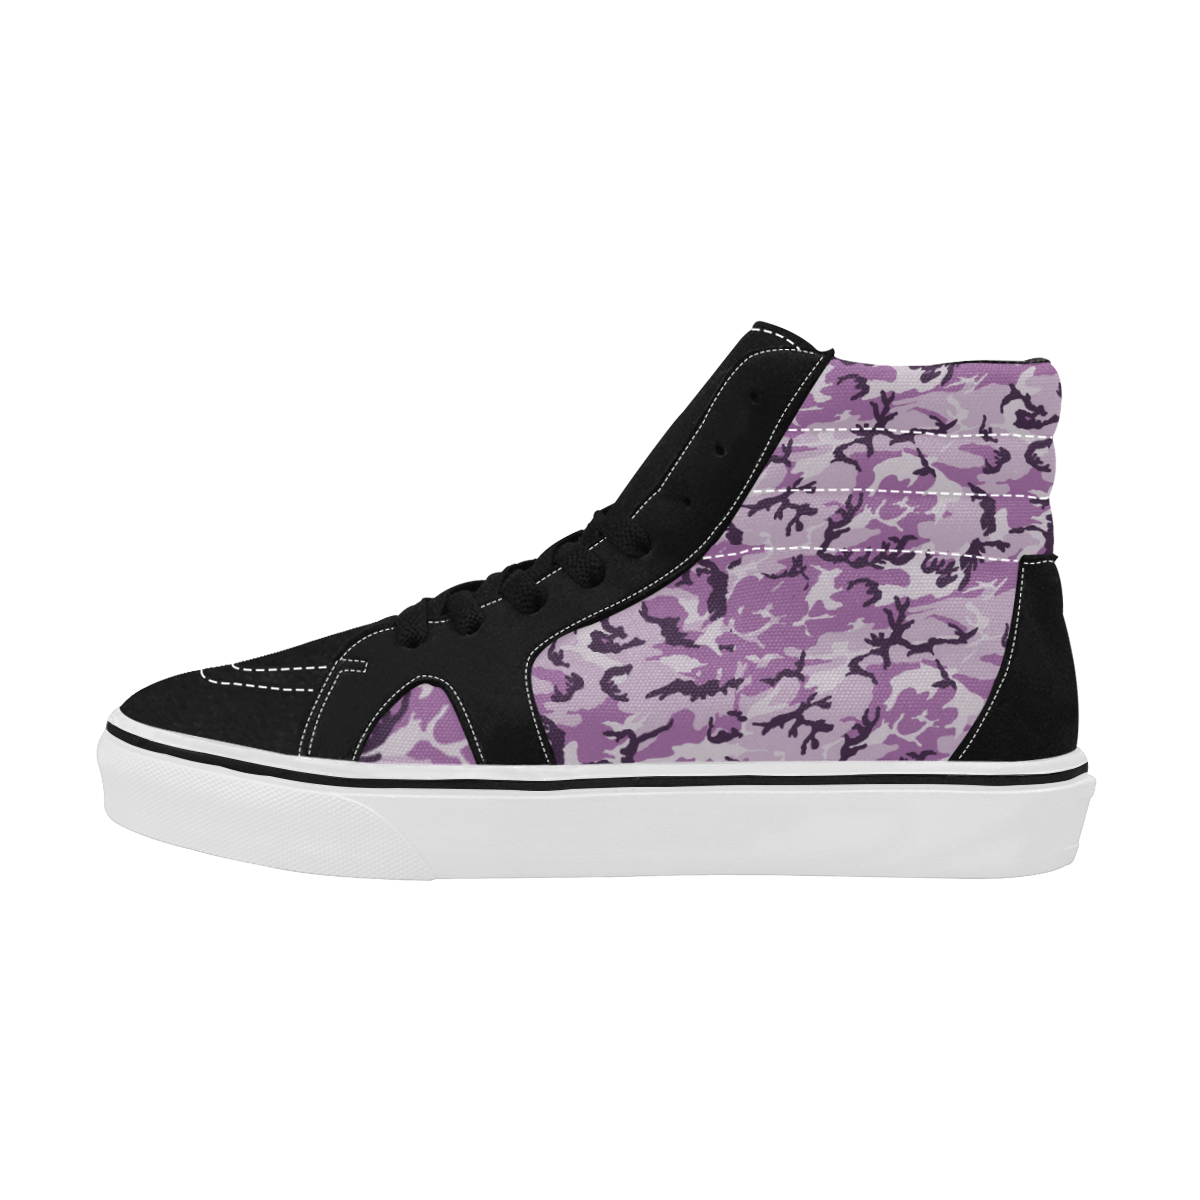 Woodland Pink Purple Camouflage Women's High Top Skateboarding Shoes/Large (Model E001-1)